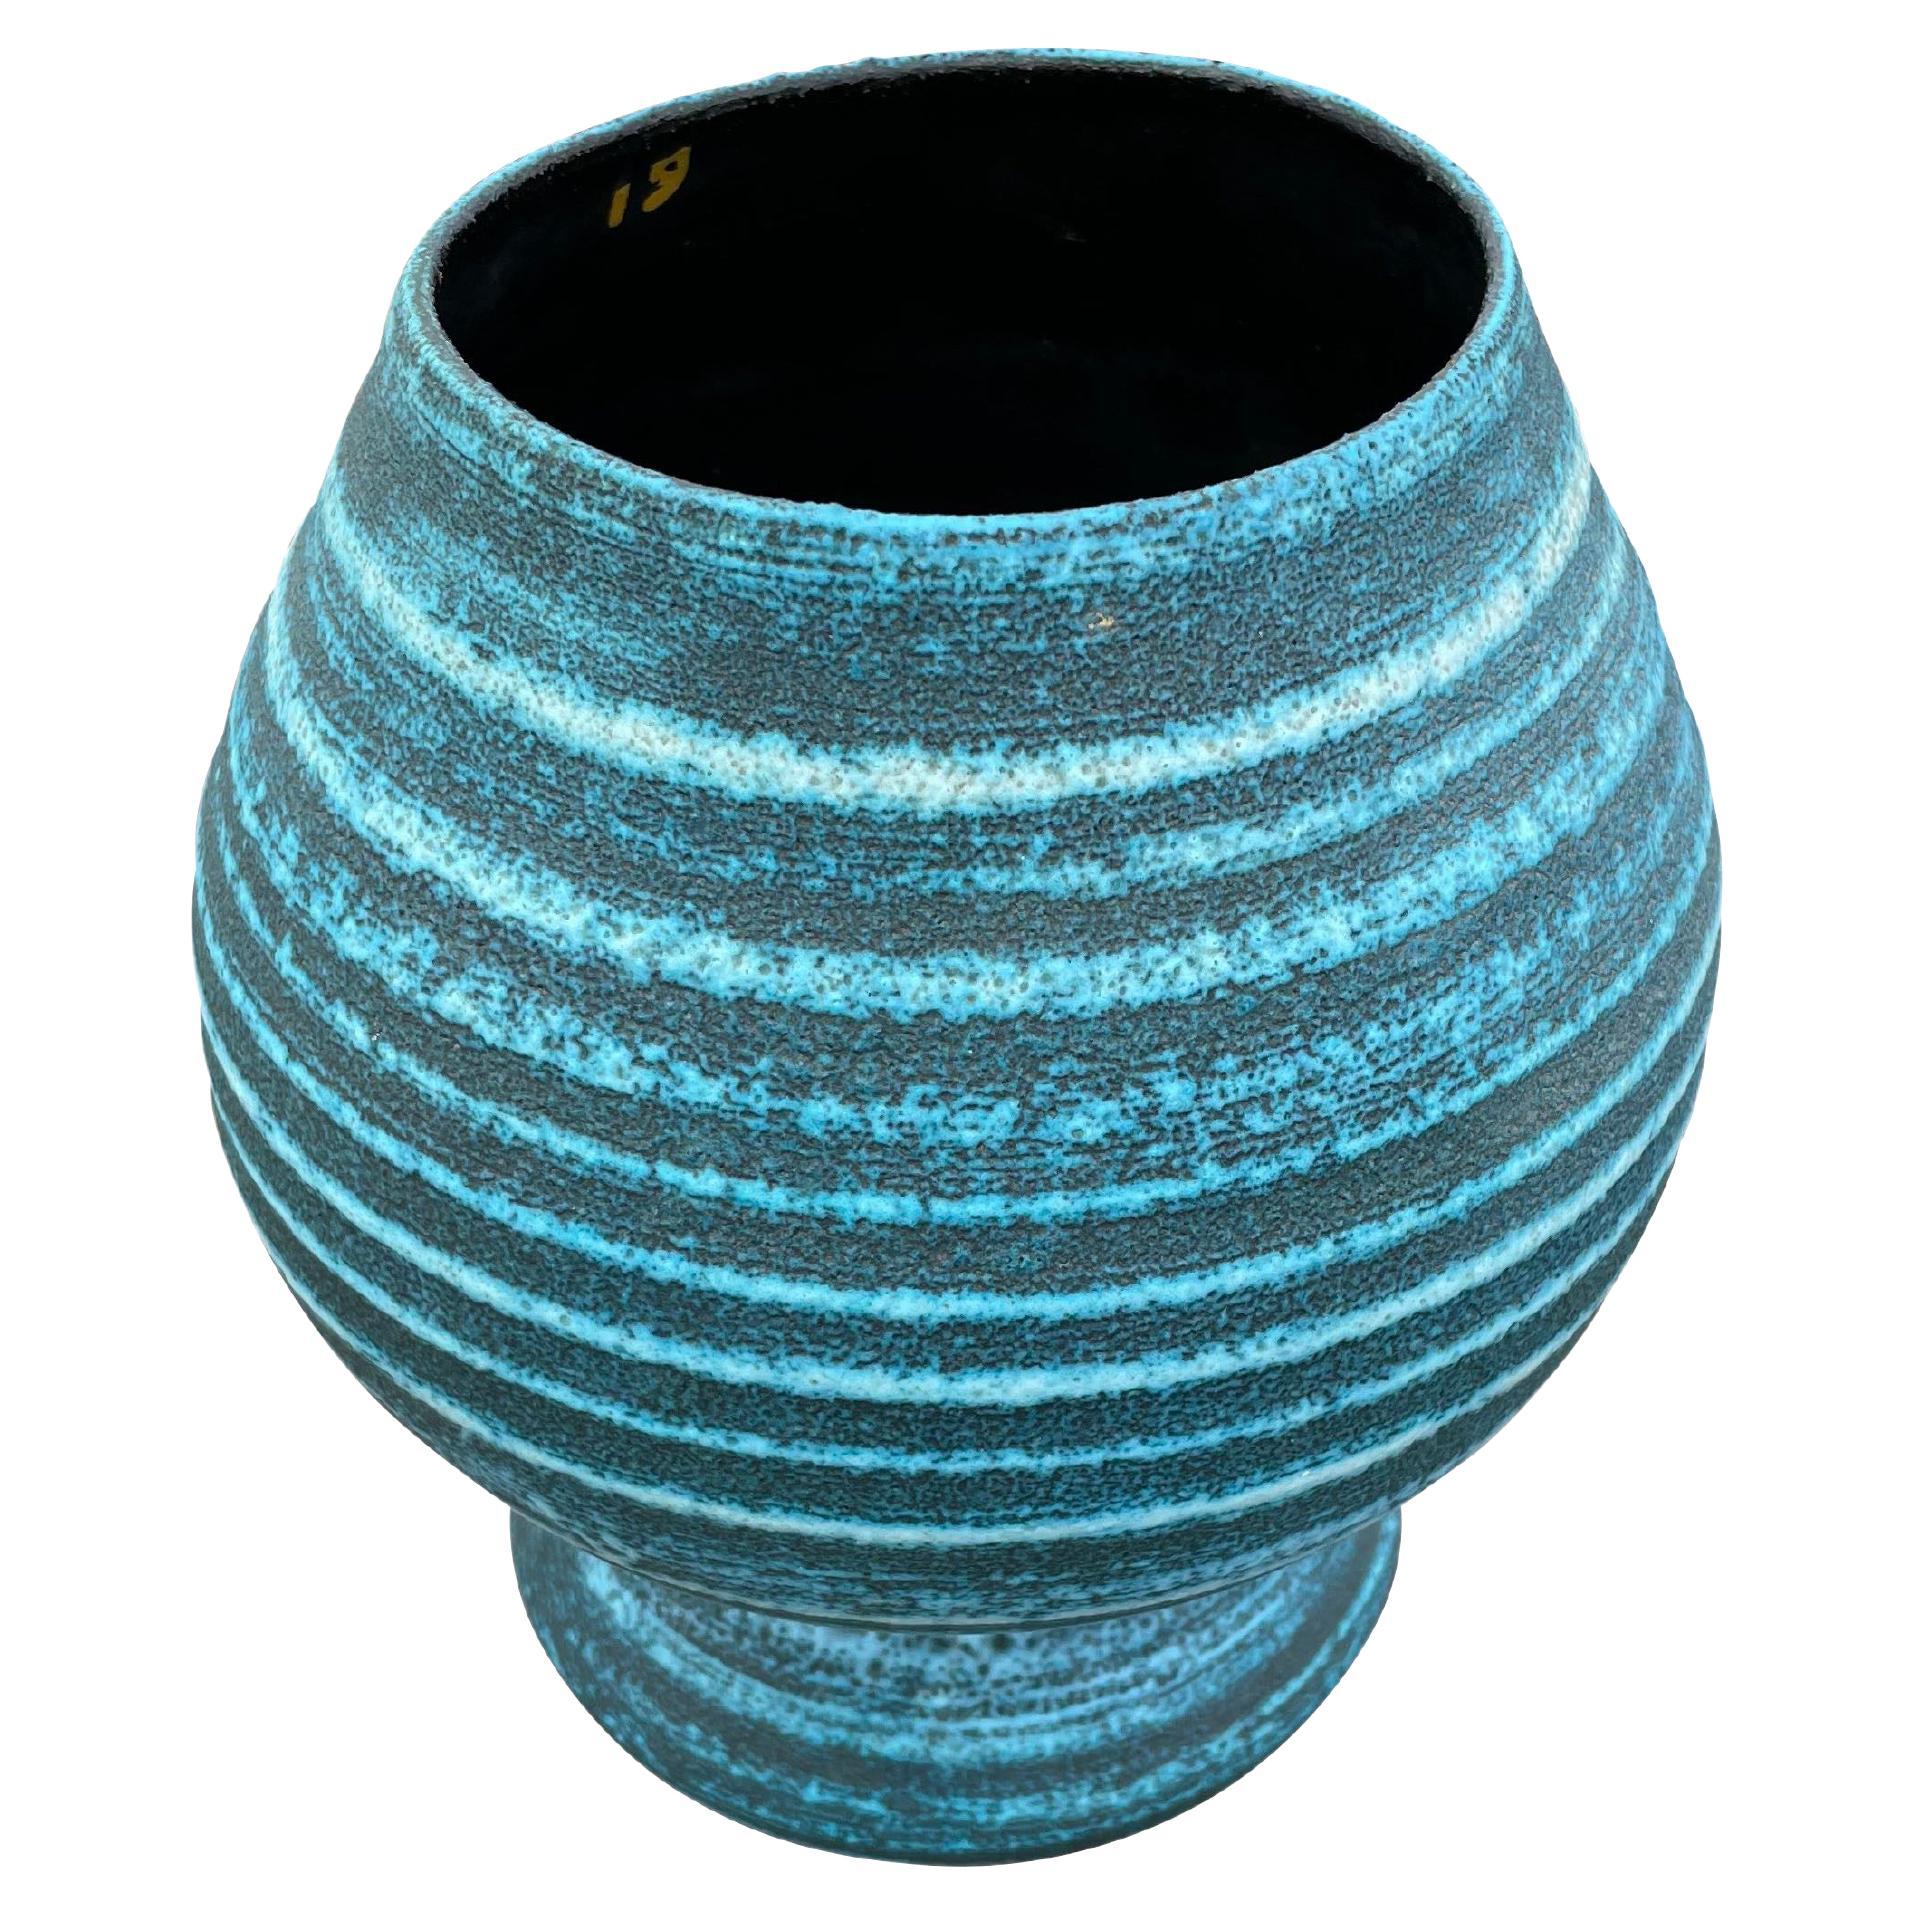 Turquoise And Charcoal Horizontal Stripe Accolay Vase, France, Mid Century